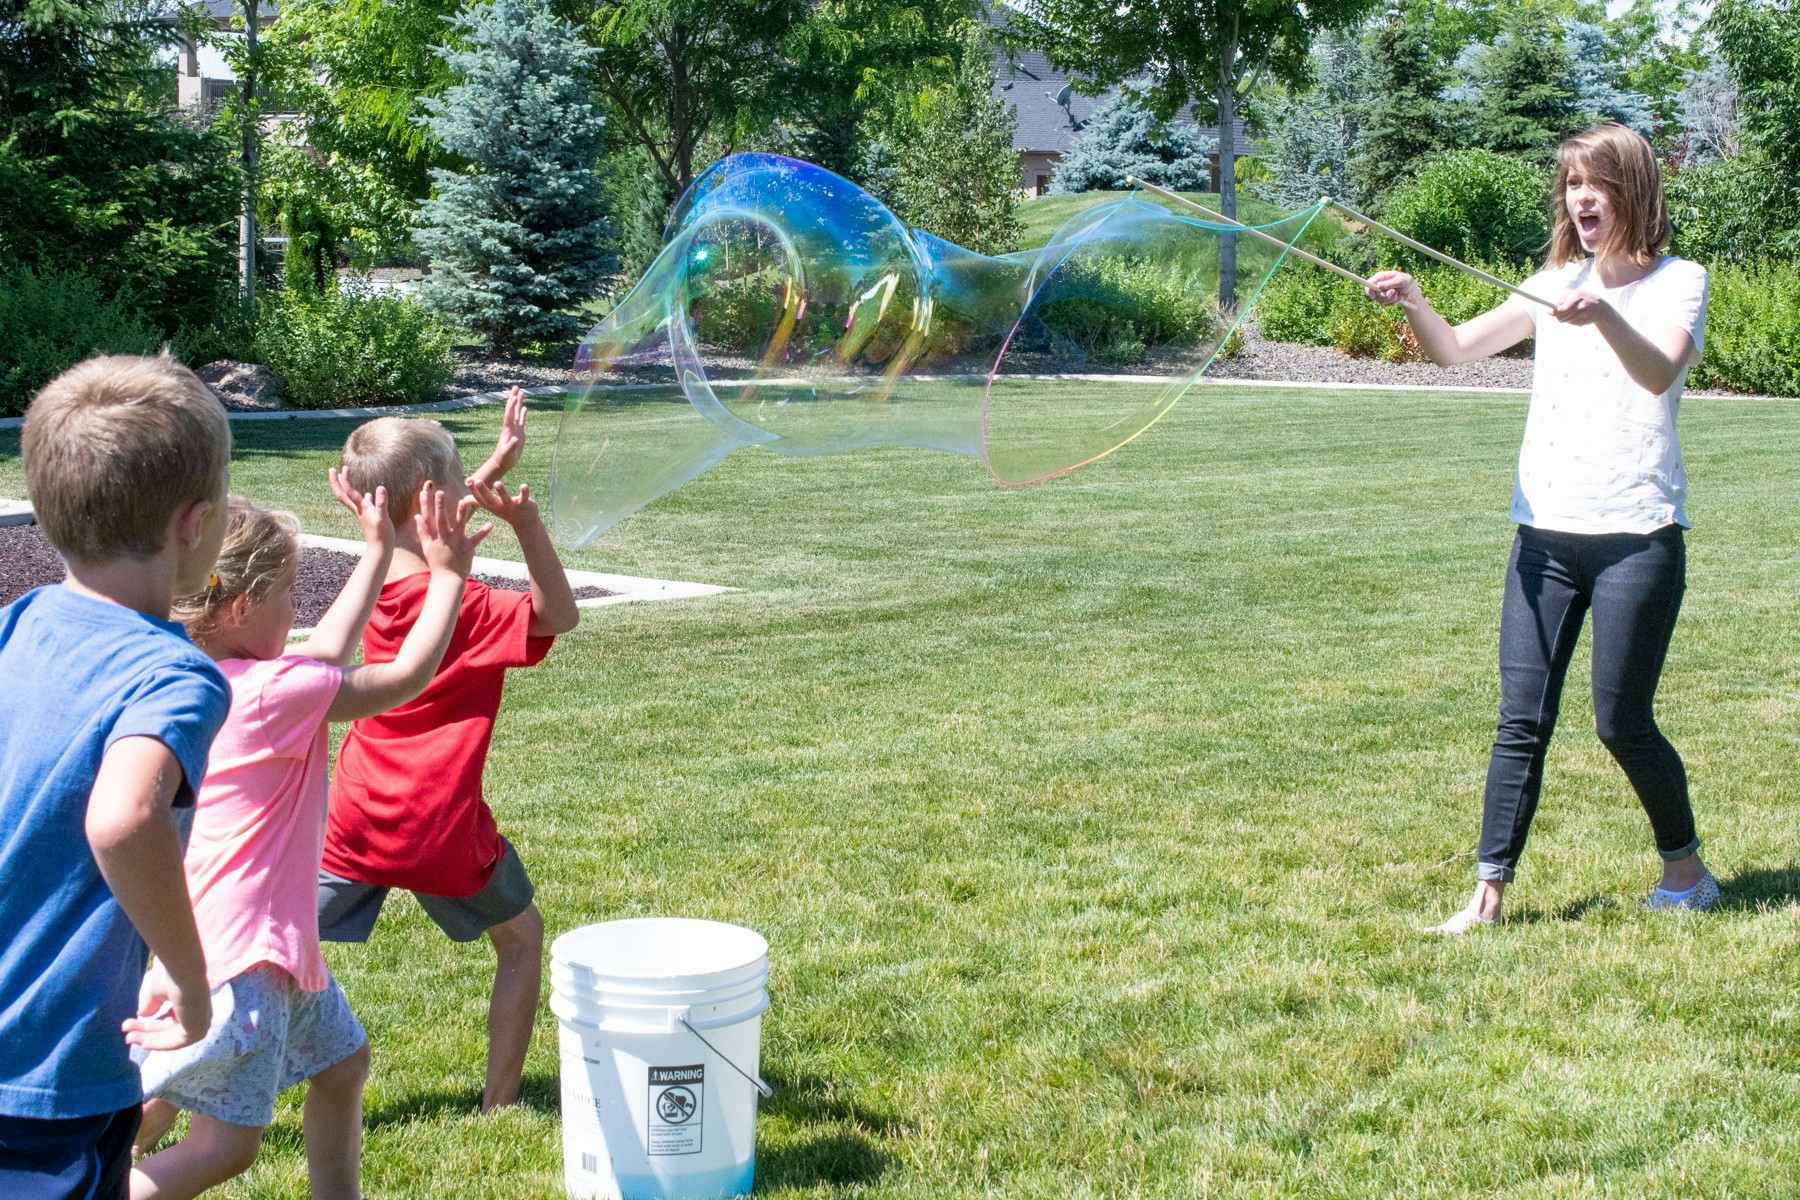 A woman holding two sticks to create a giant bubble in a backyard next to a bucket, and children running up to play.